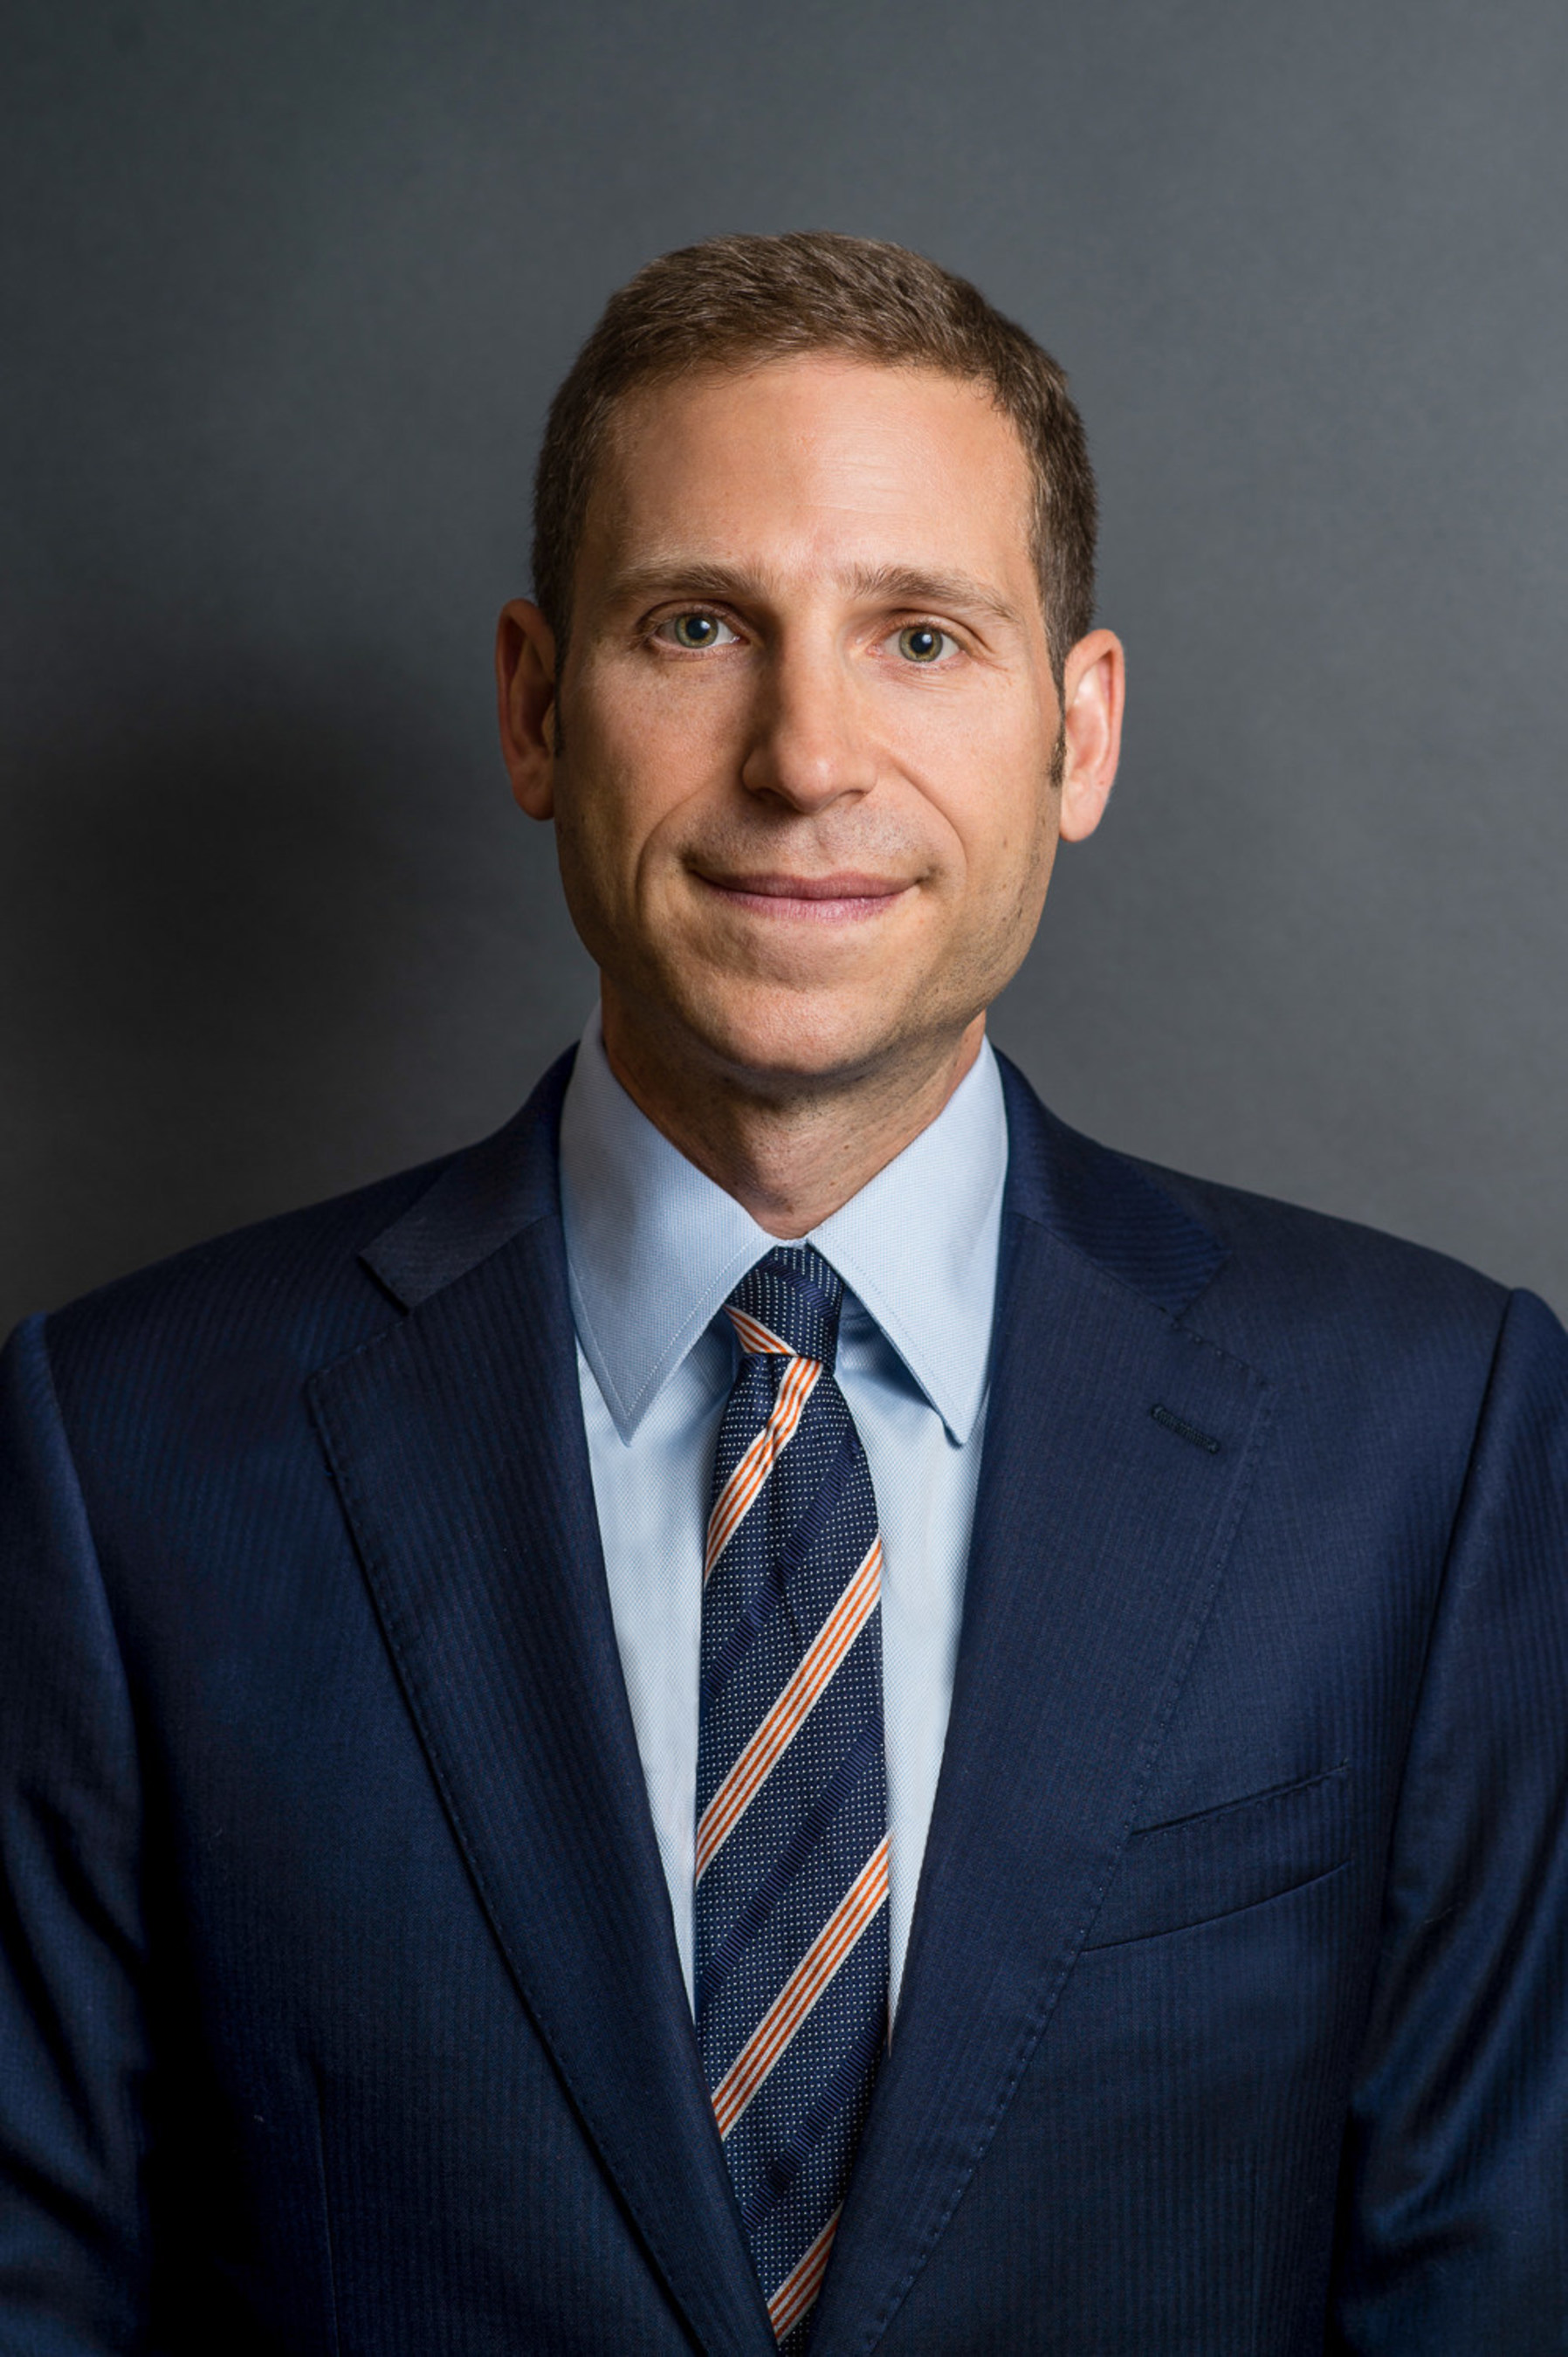 Jed Nussbaum, Founder, Managing Partner and Chief Investment Officer of Nut Tree Capital Management